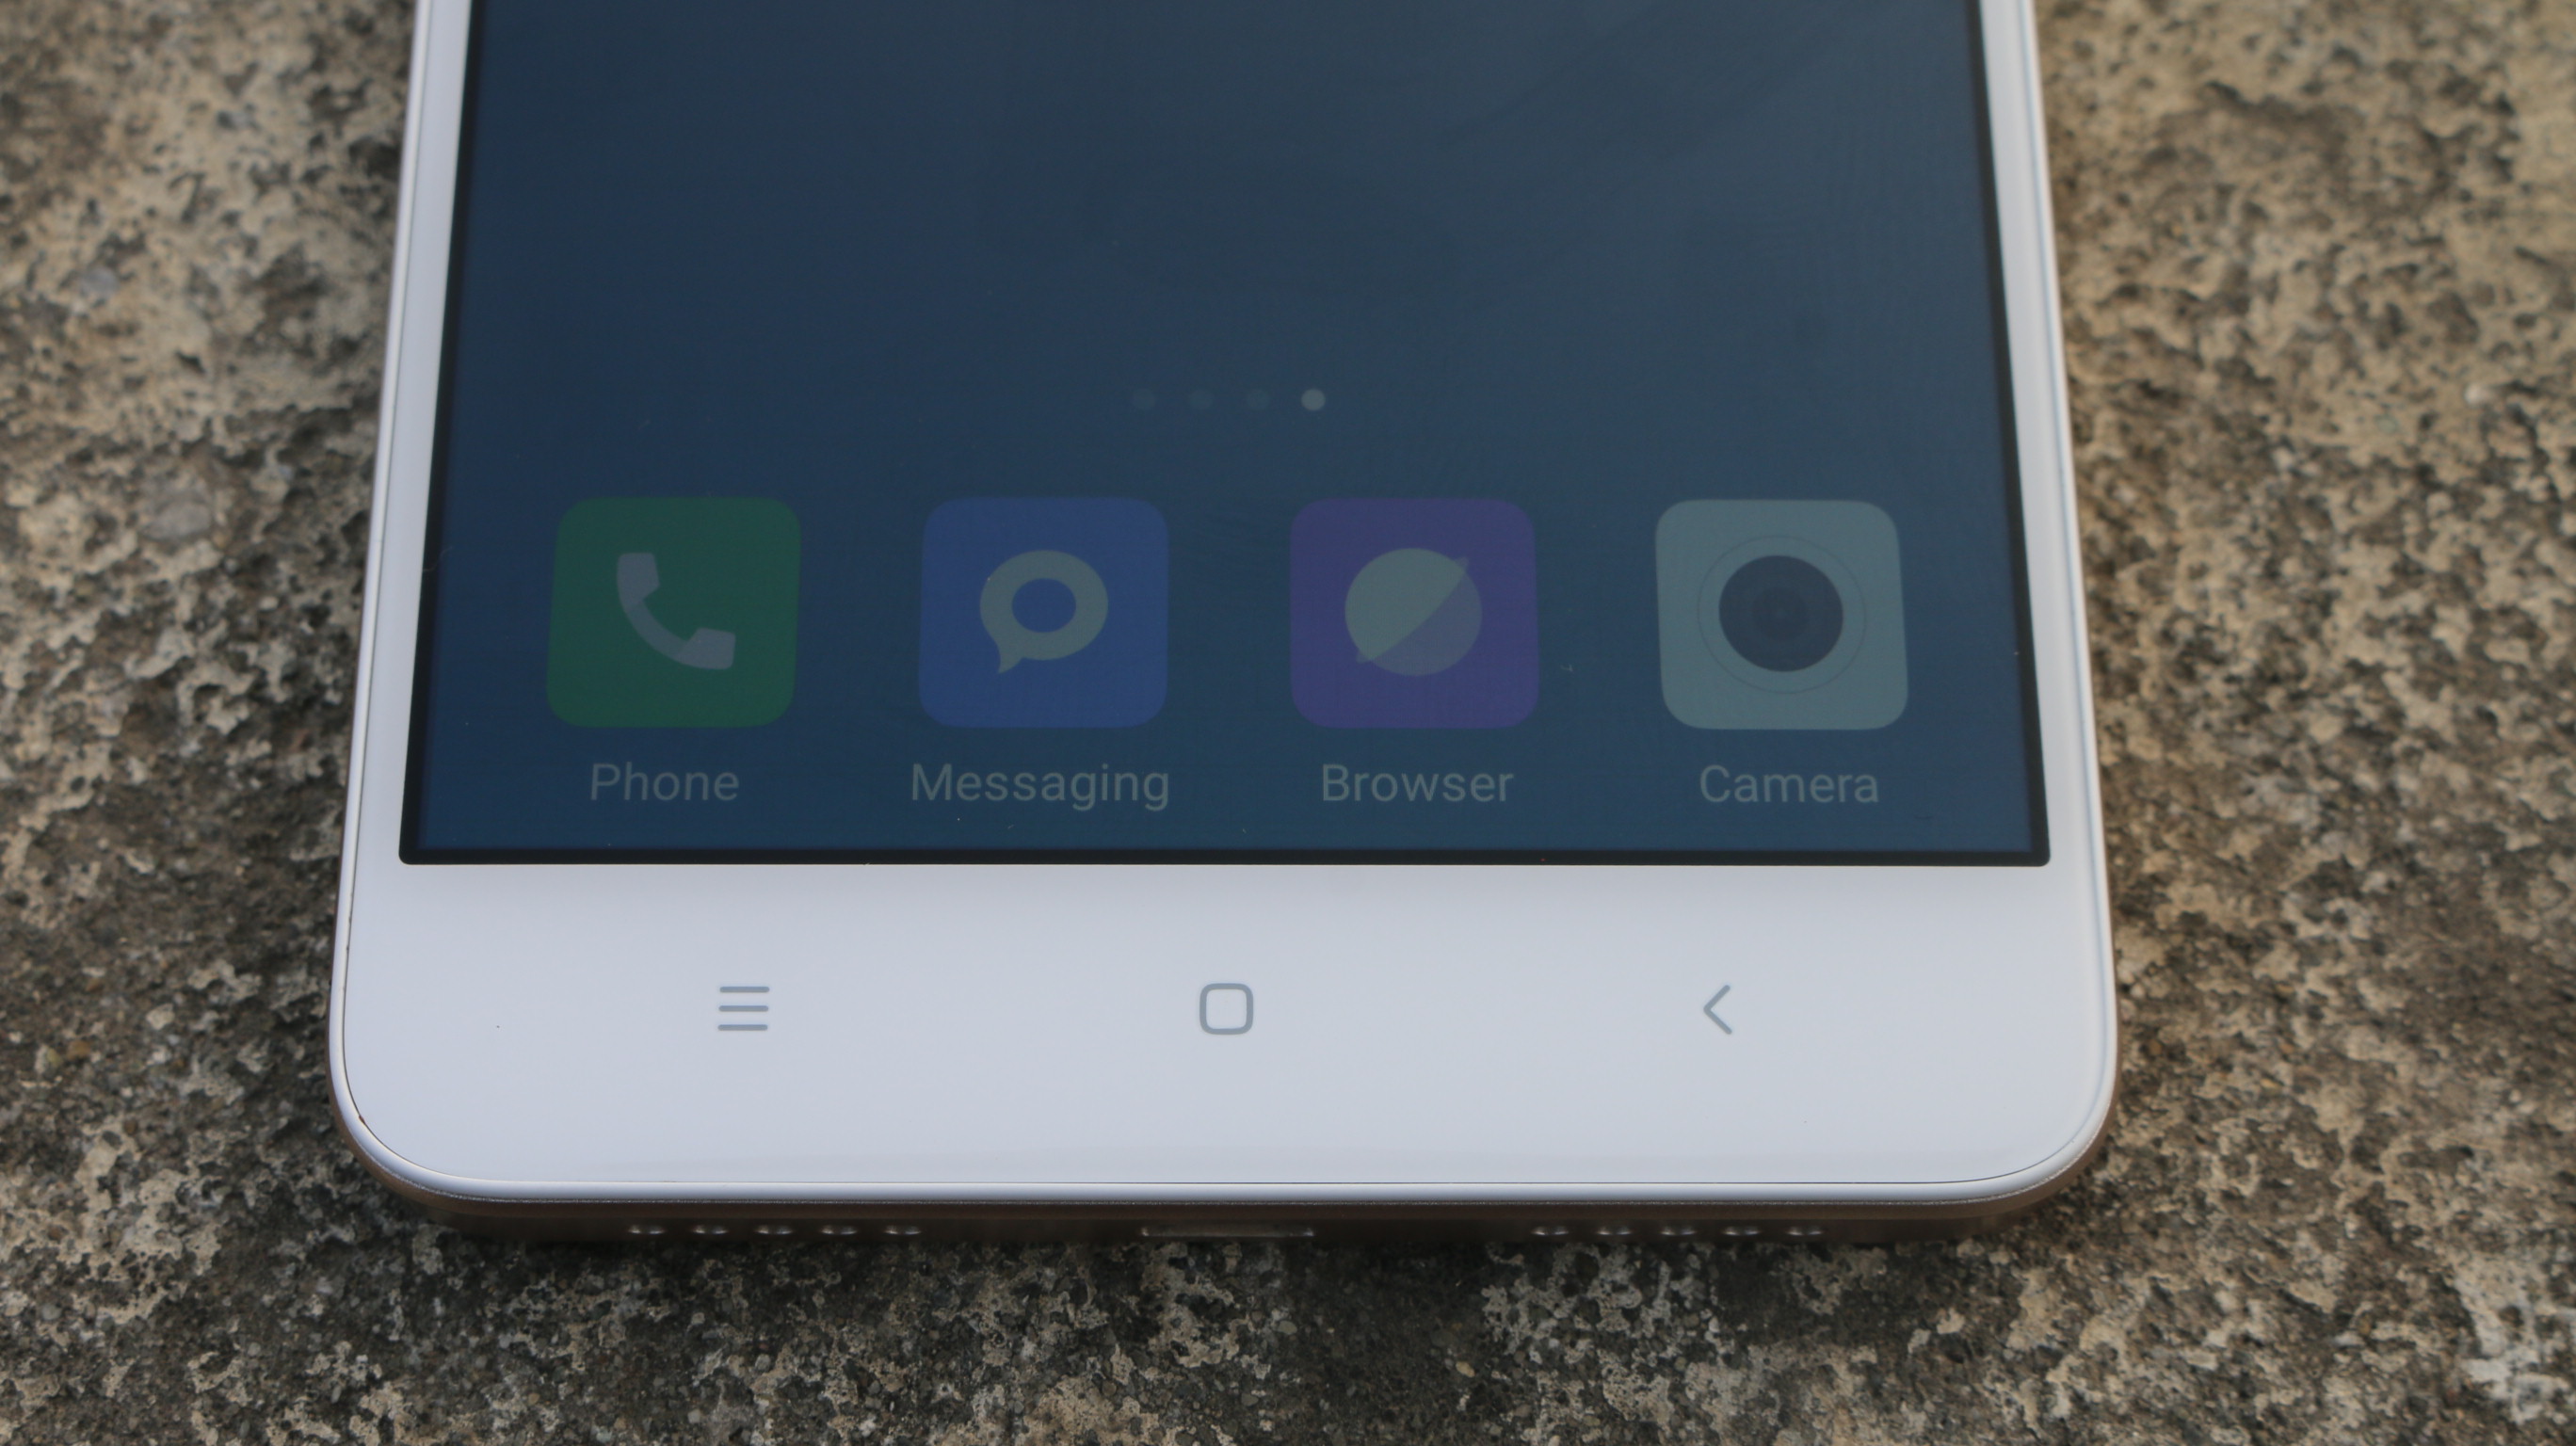 Xiaomi Redmi Note 4 Quick Review, Specs Overview And Hands On